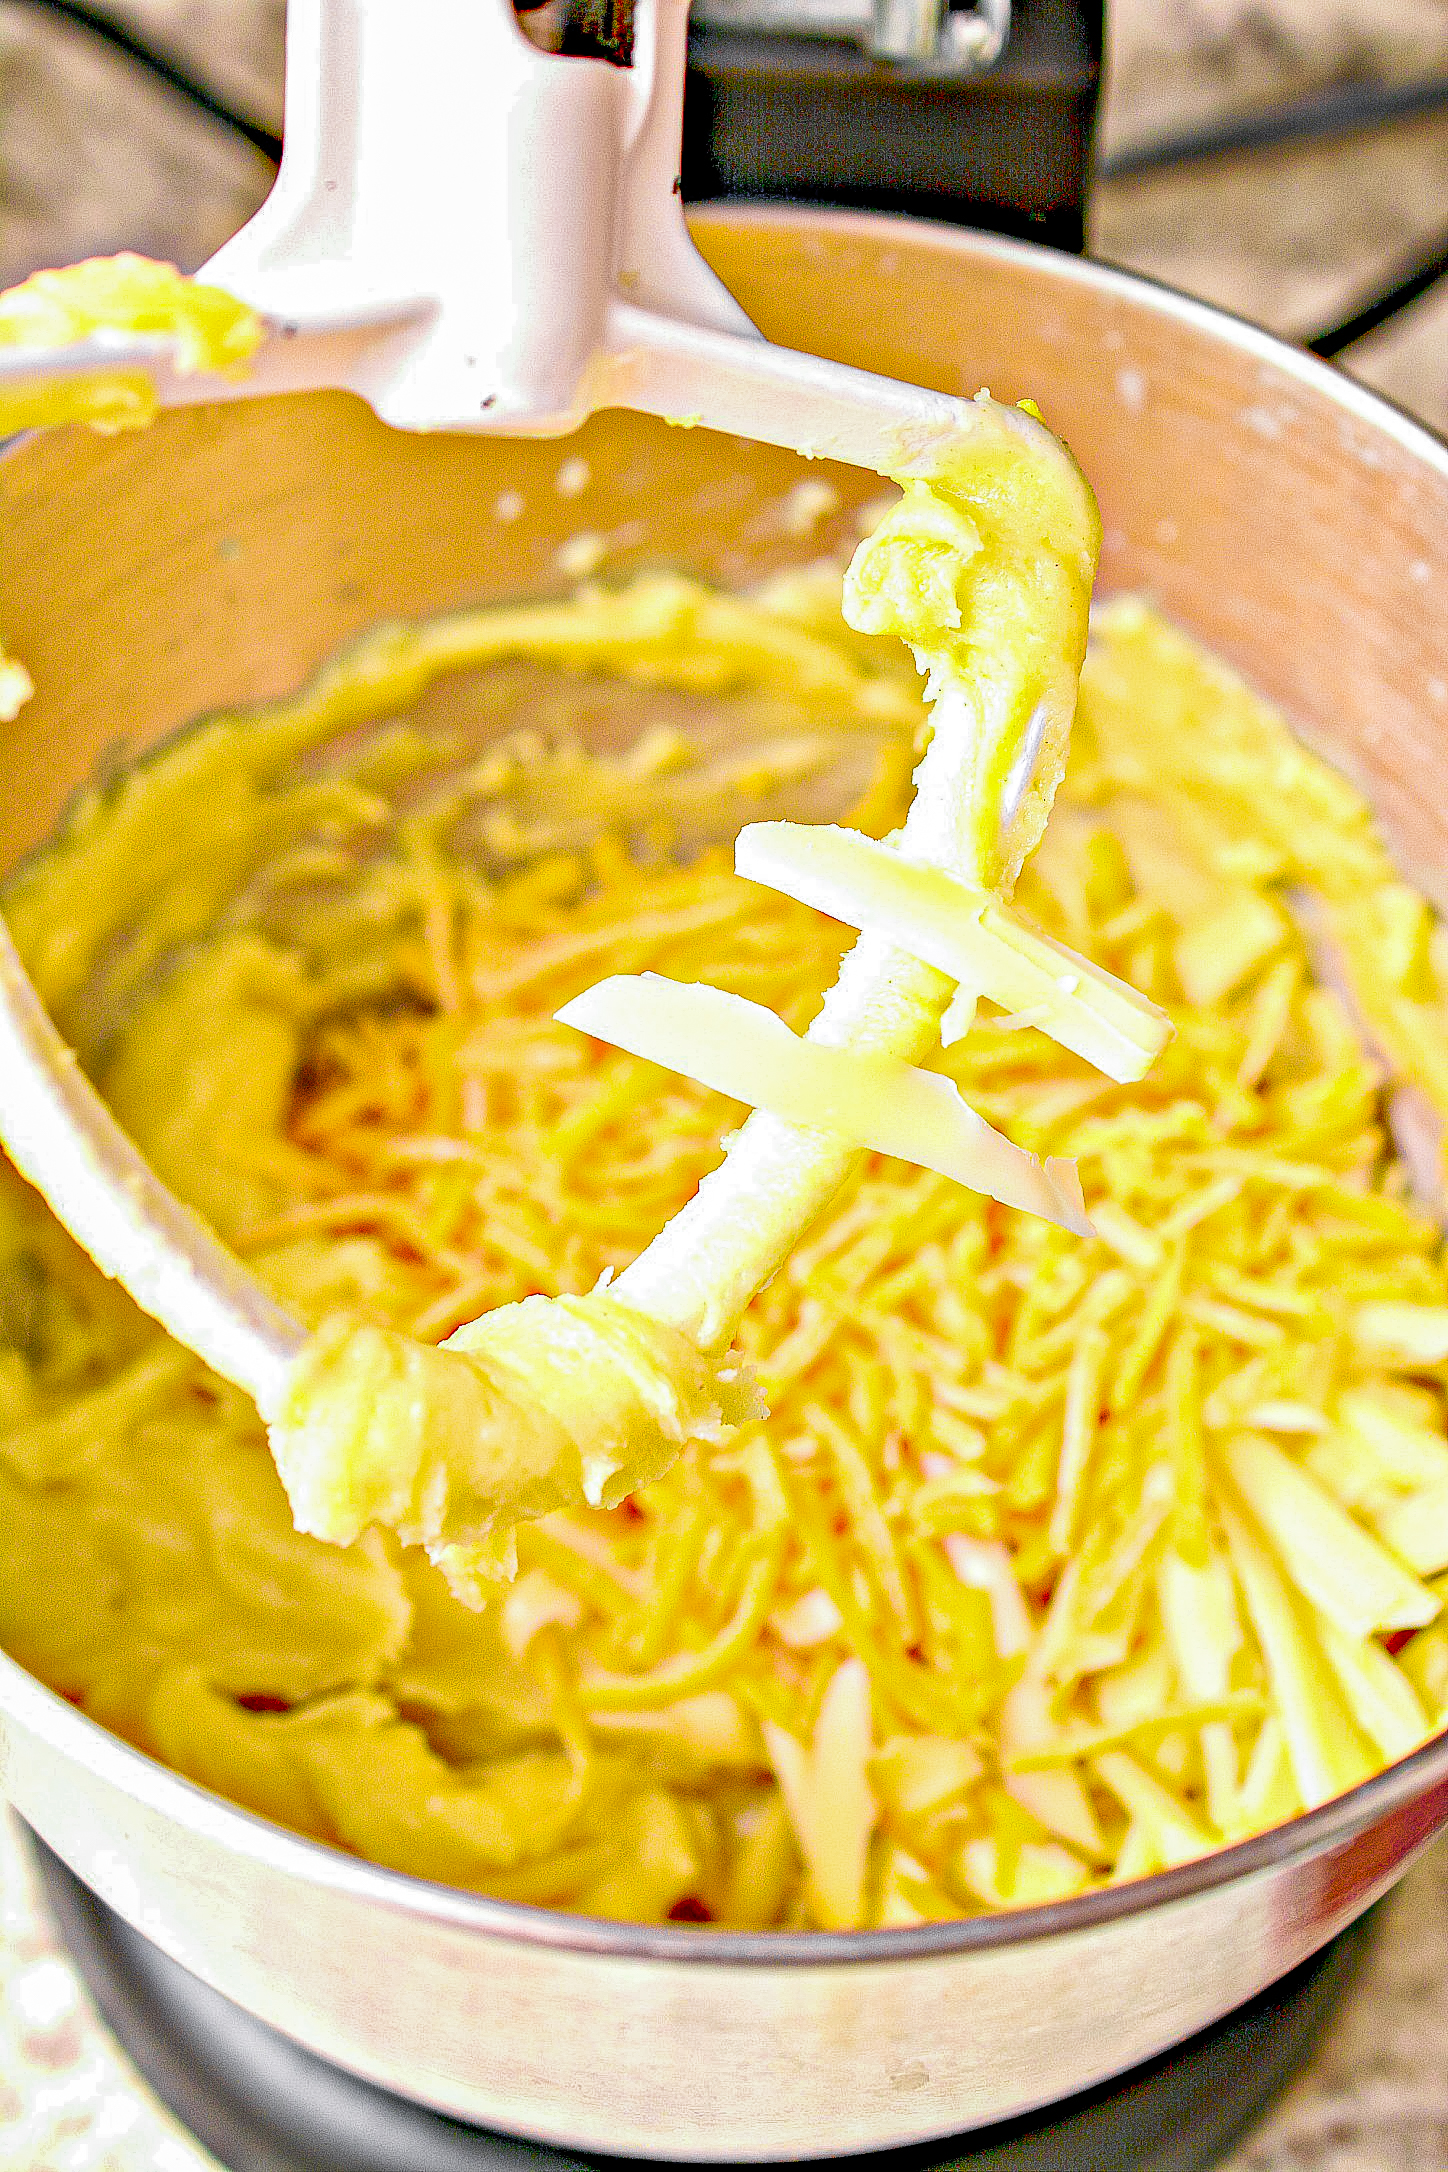 Mix the cheese into the dough until well incorporated.